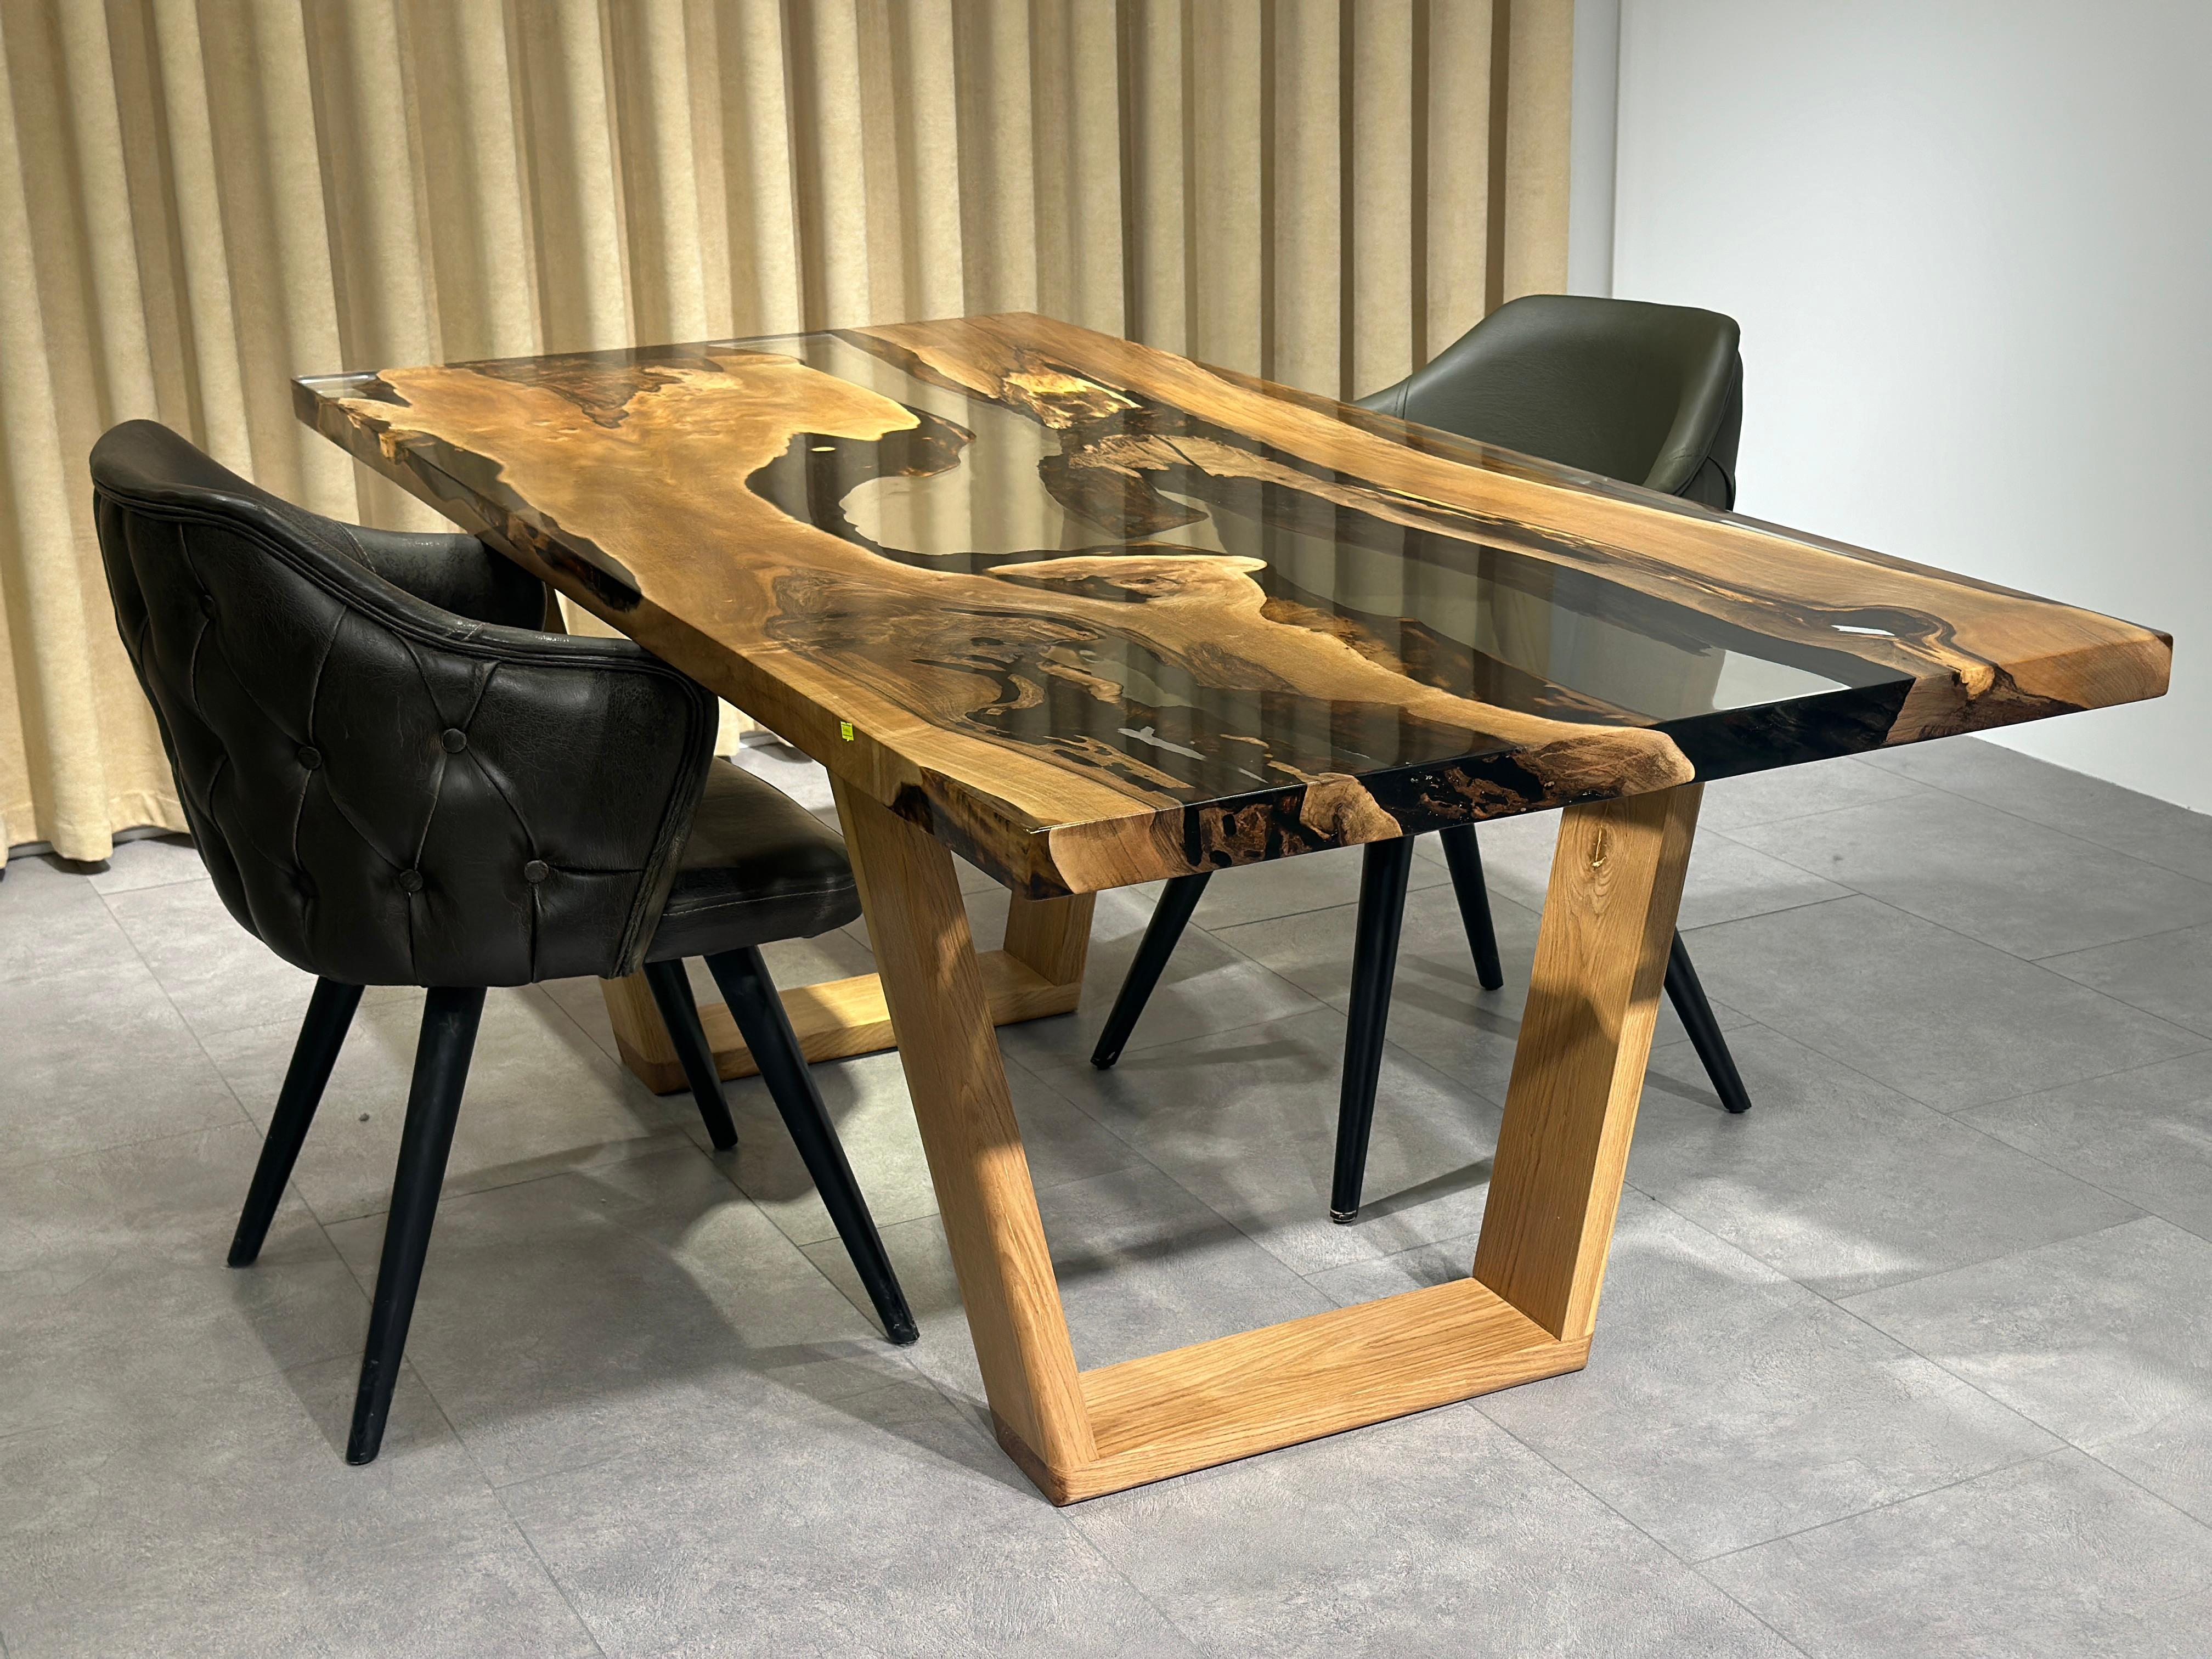 Turkish Clear Resin Walnut Live Edge Dining Room Table For Sale